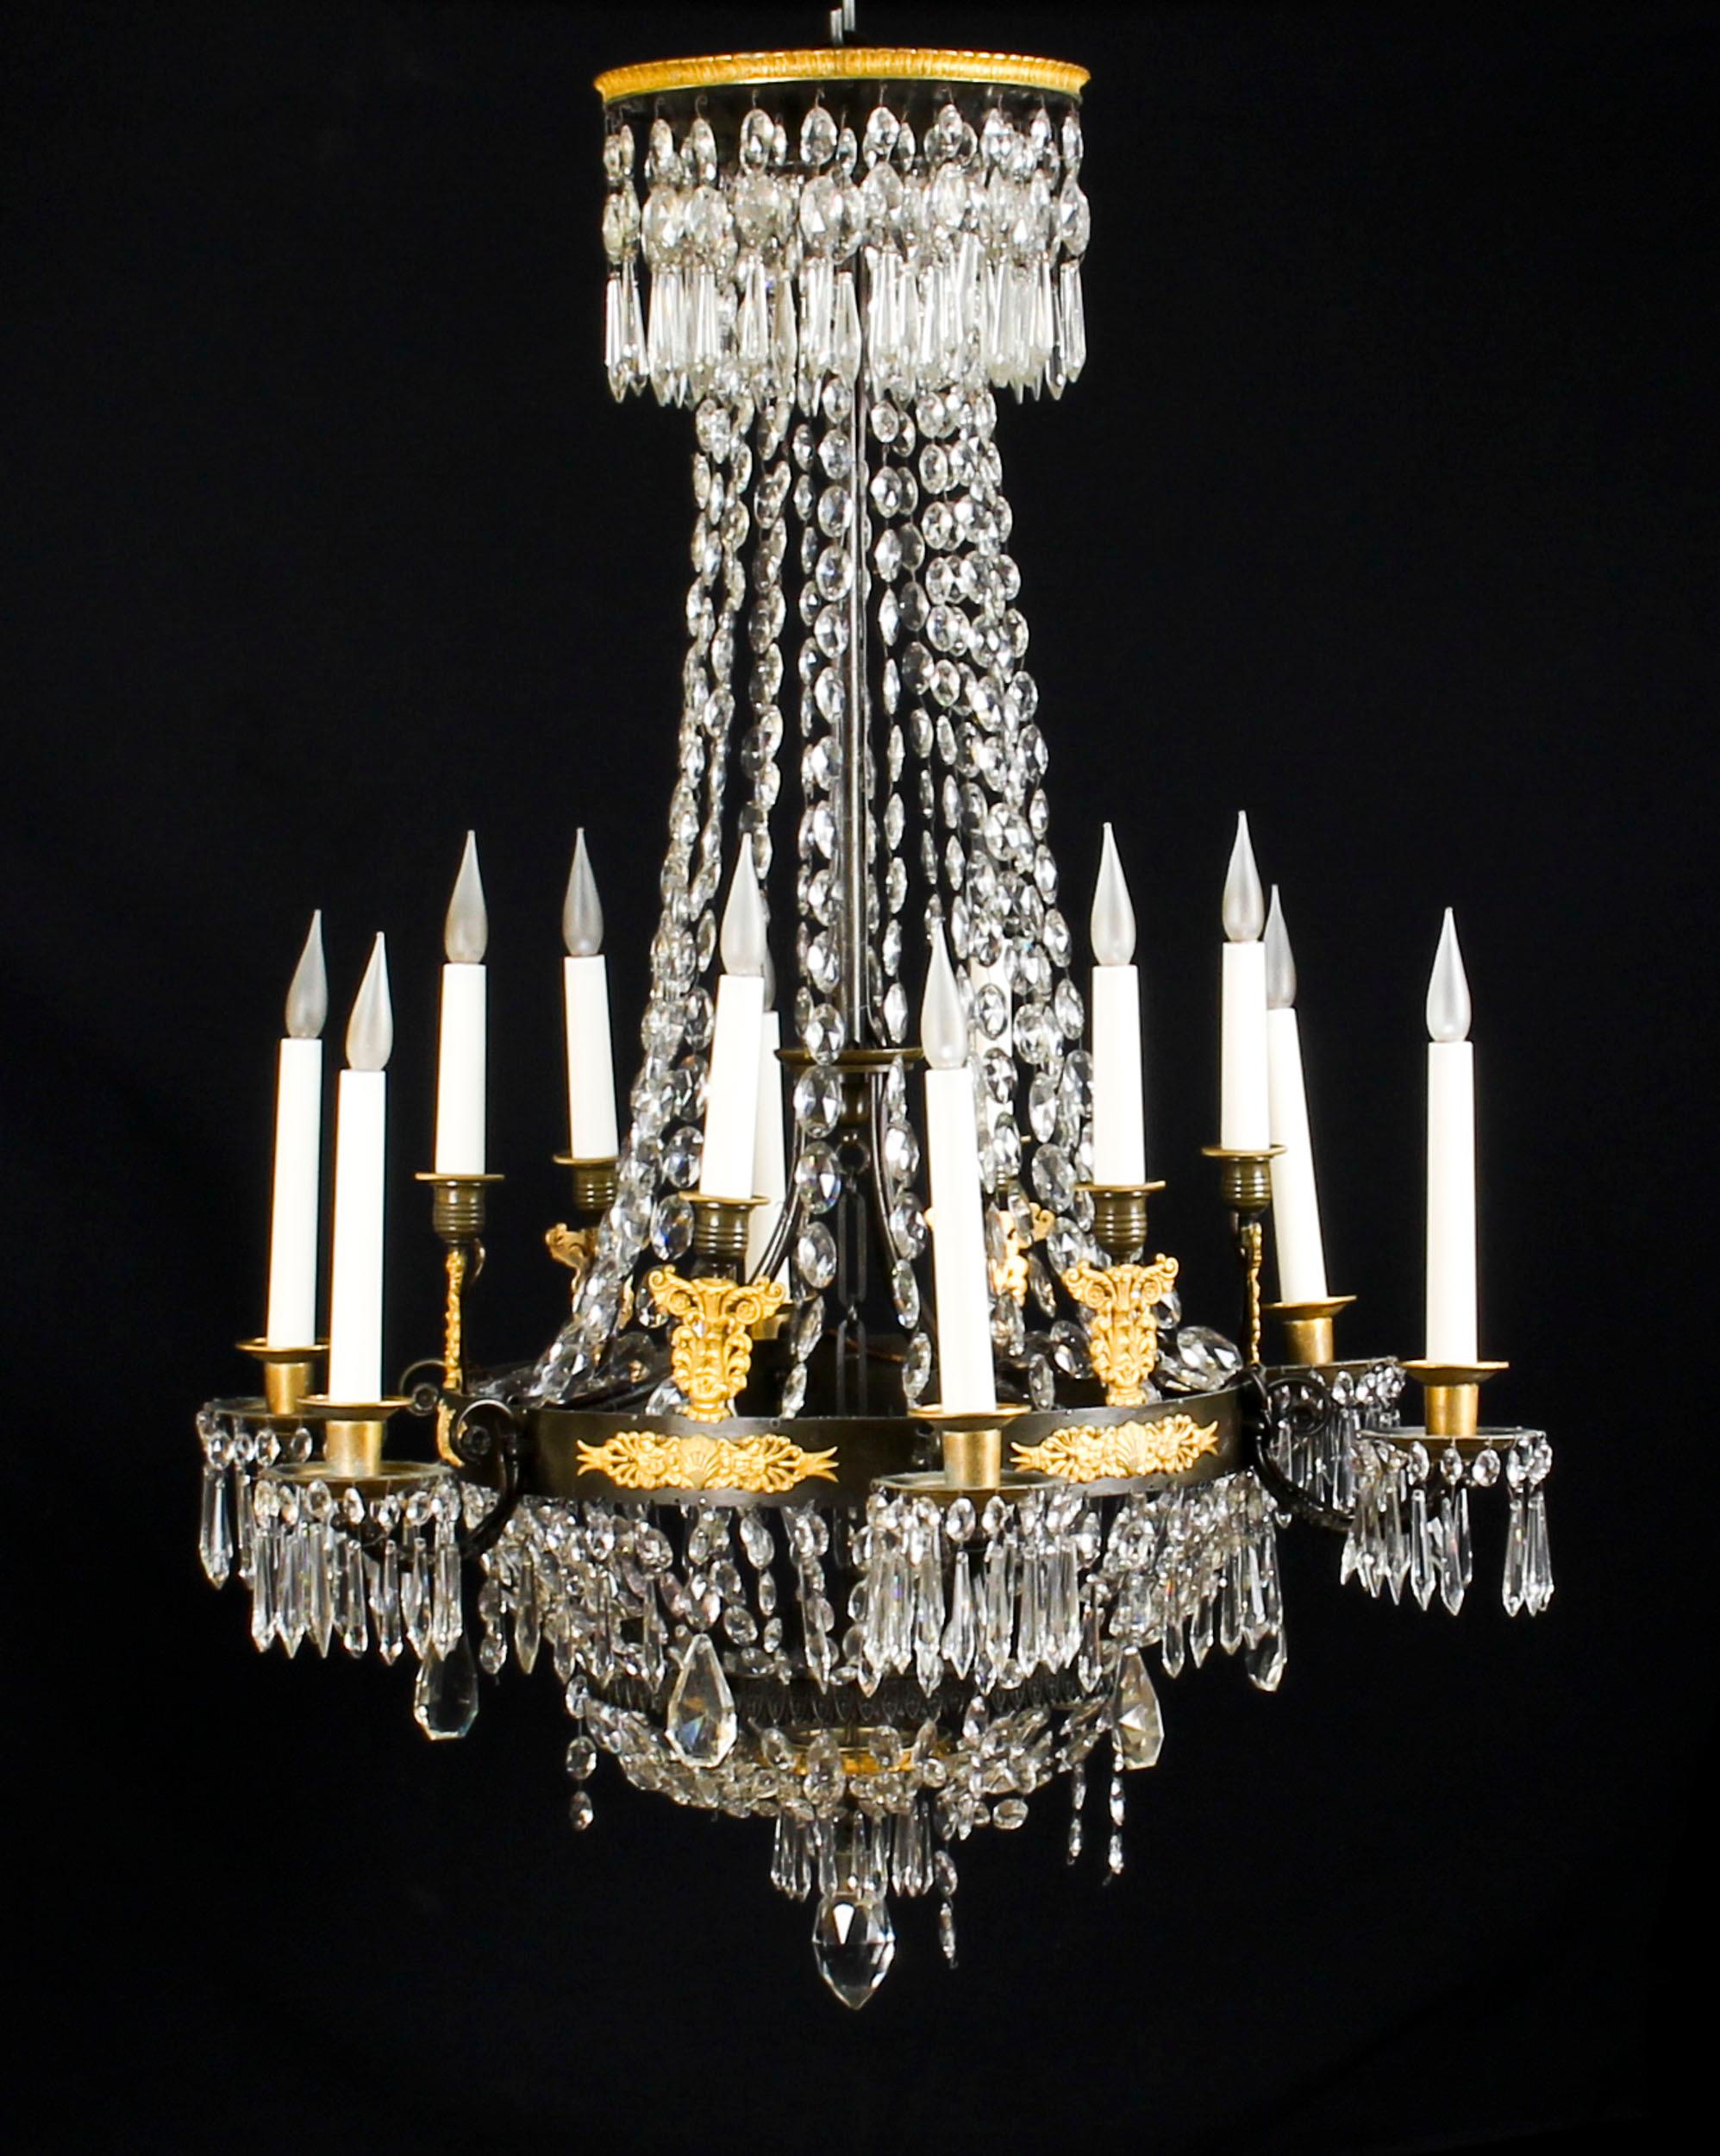 Crystal Antique French Empire 12-Light Ballroom Chandelier, 19th Century